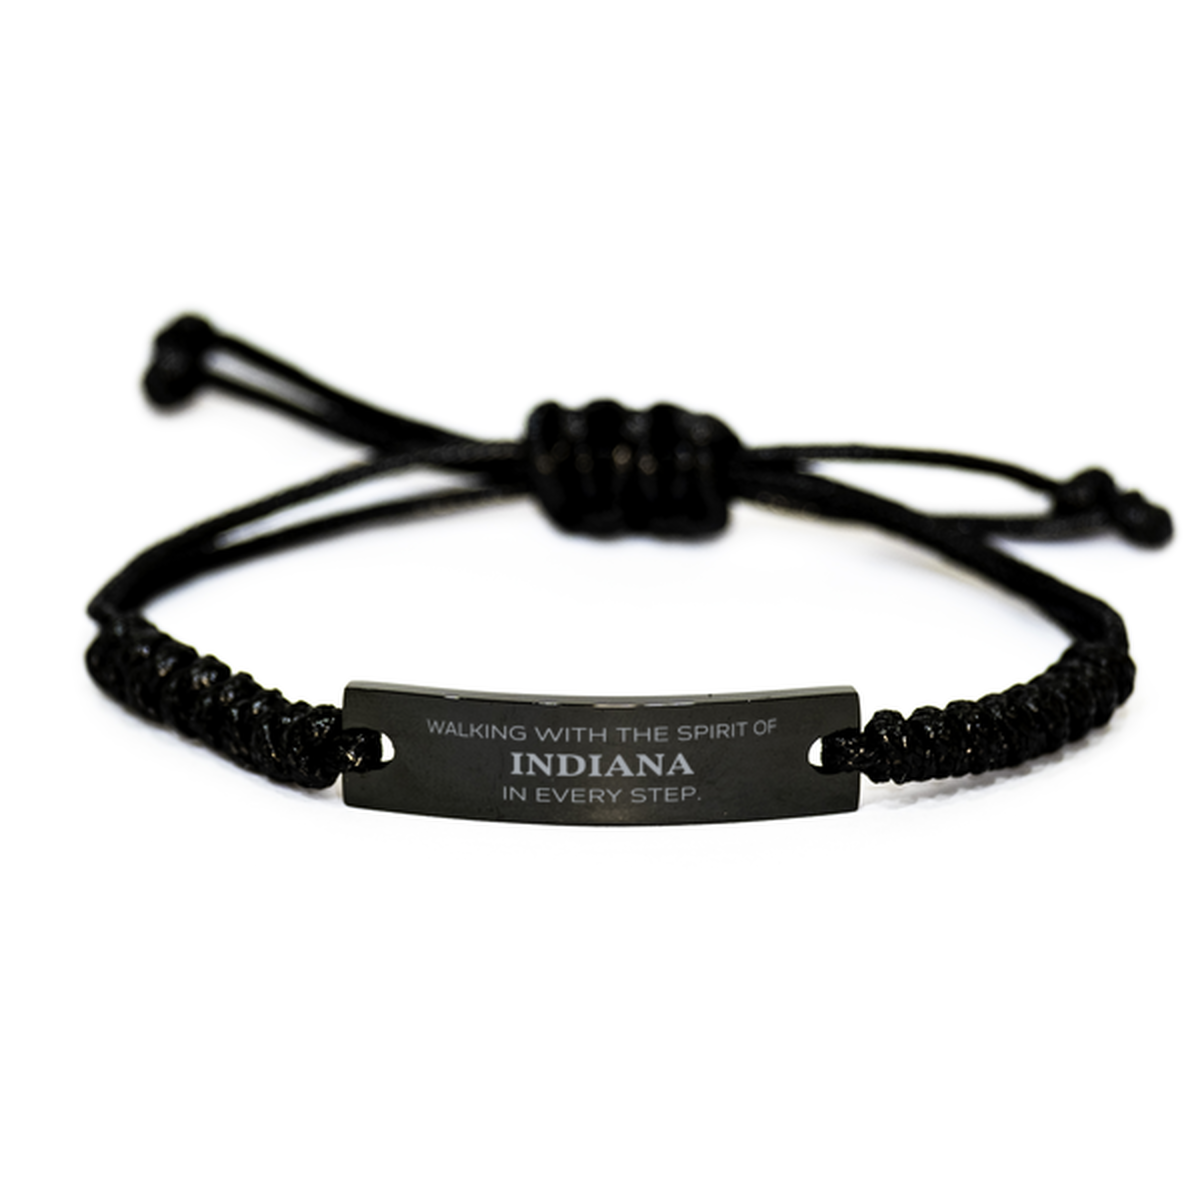 Indiana Gifts, Walking with the spirit, Love Indiana Birthday Christmas Black Rope Bracelet For Indiana People, Men, Women, Friends